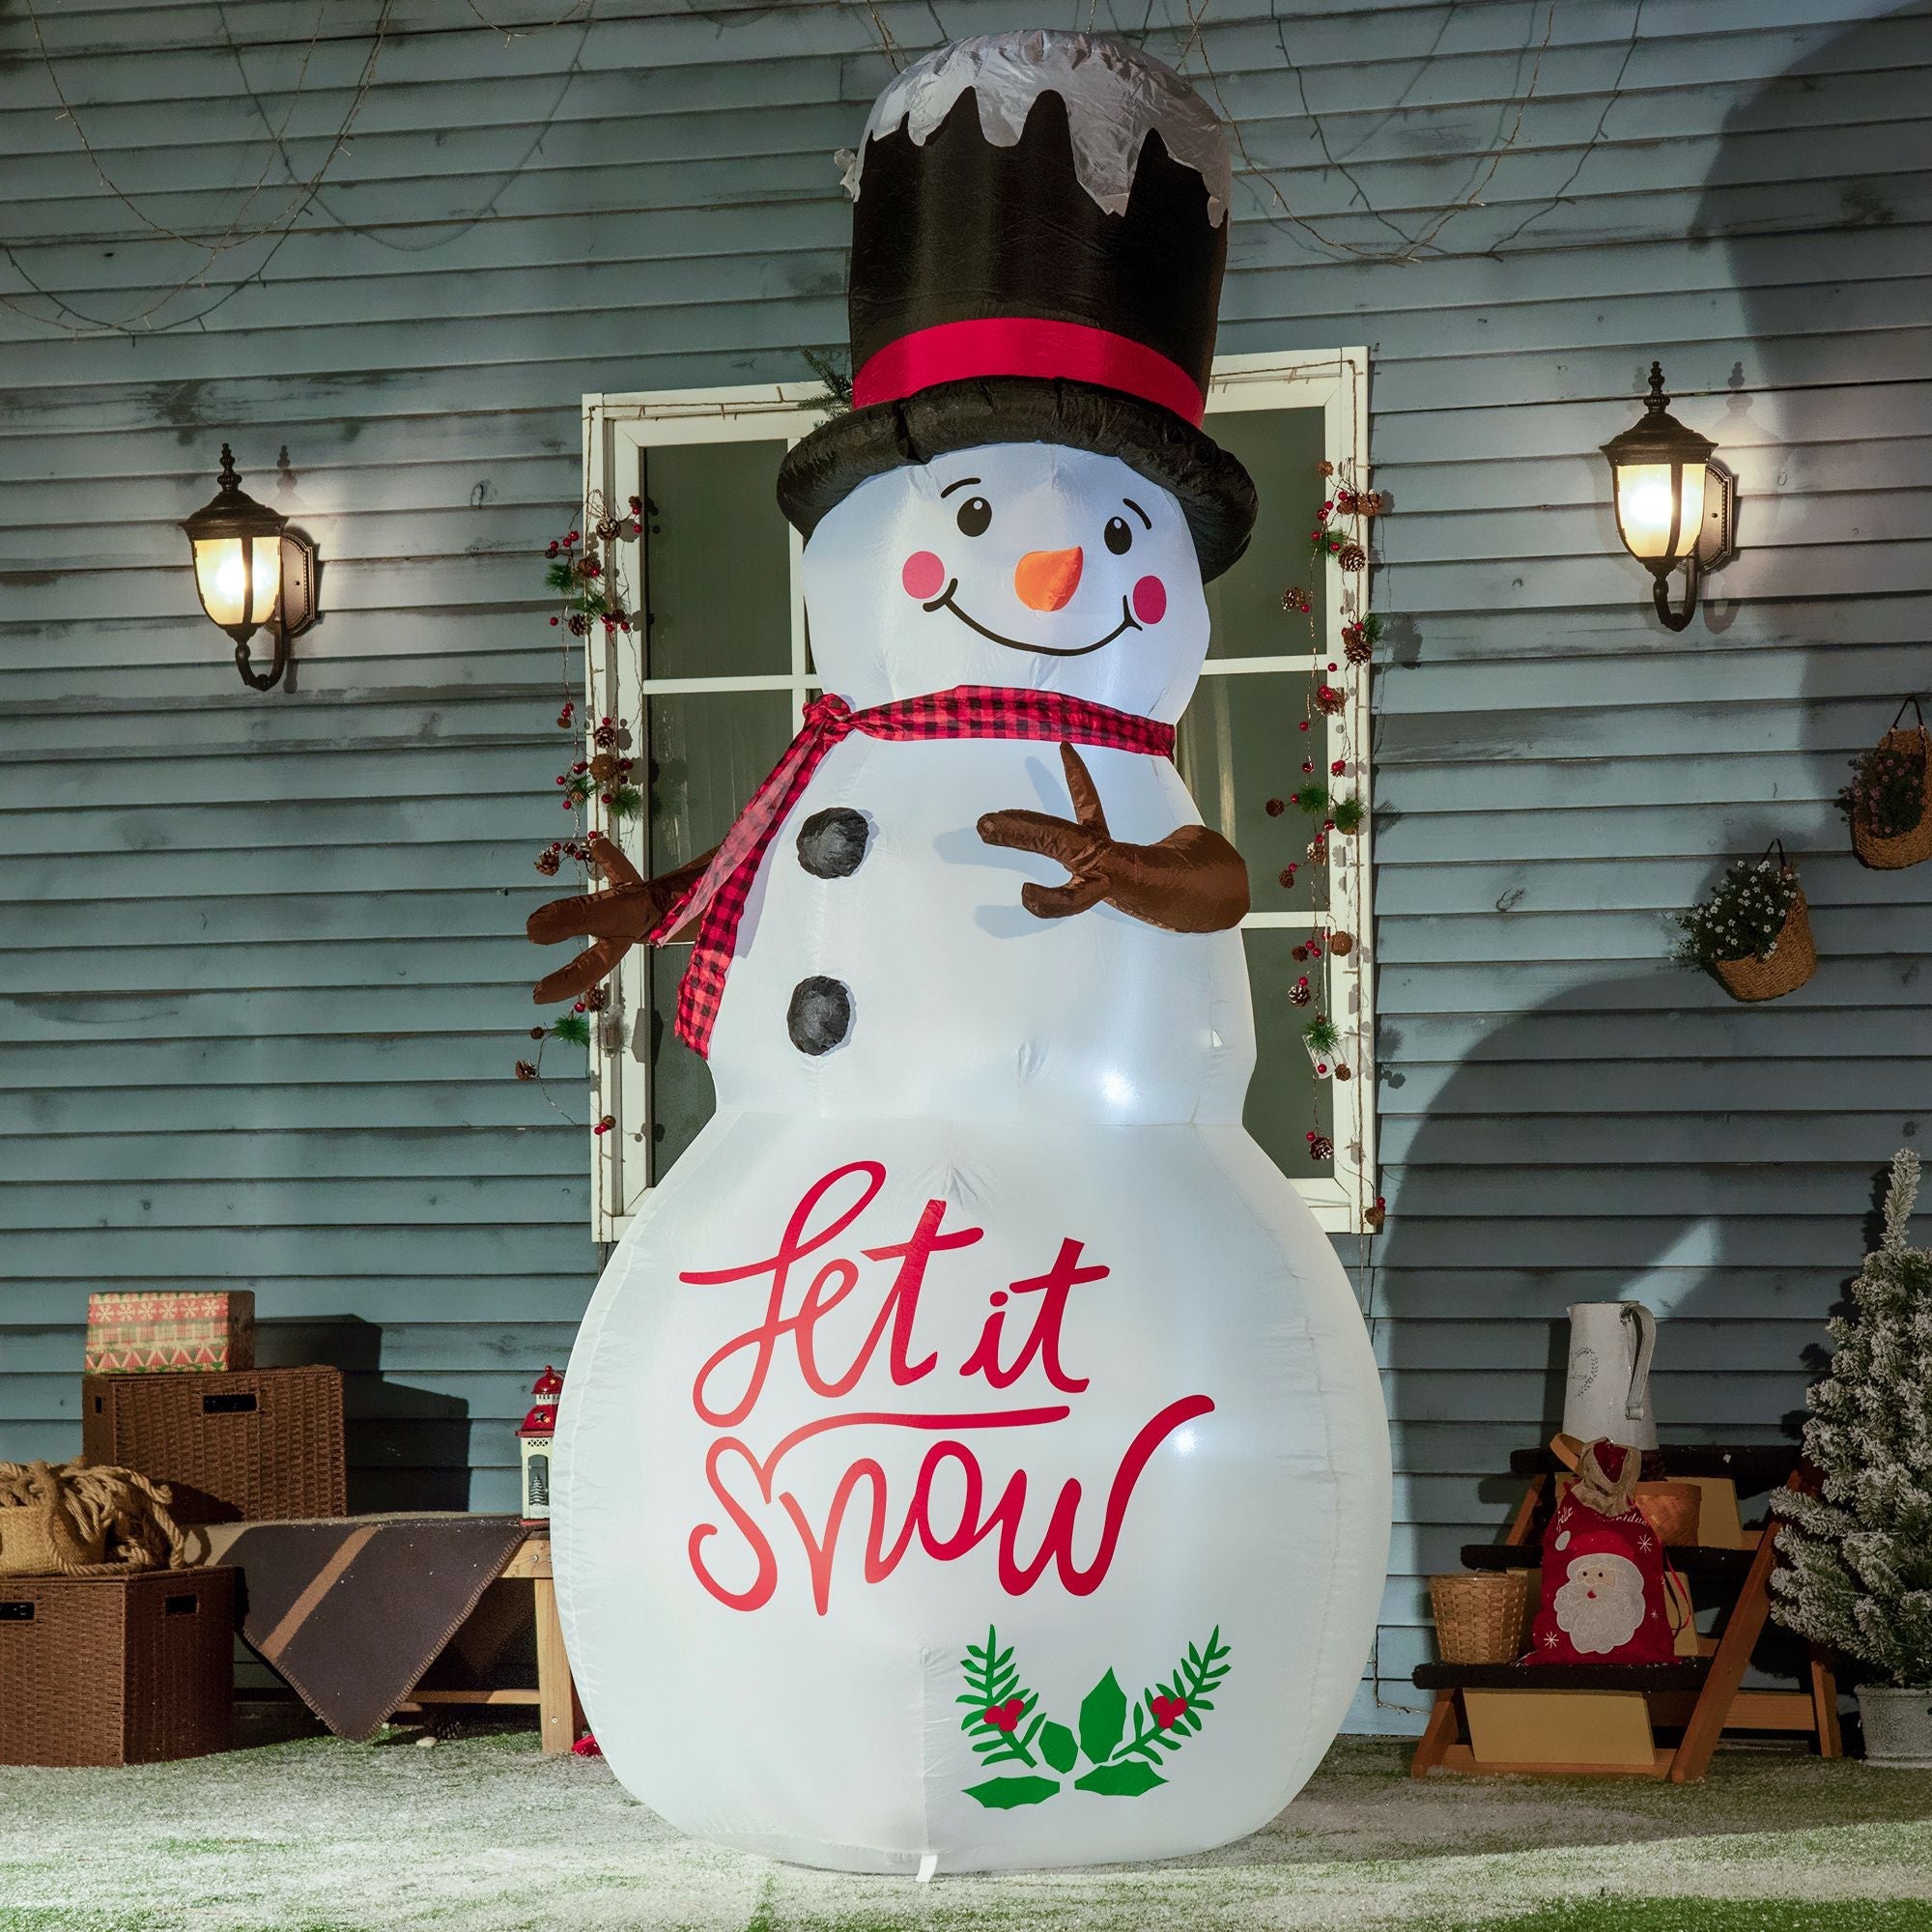 7 FT Christmas Inflatables Giant Snowman Outdoor Decorations, Blow up Snow  Man Yard Decor Built-in Bright LED Light Wear Magic Hat, Weatherproof